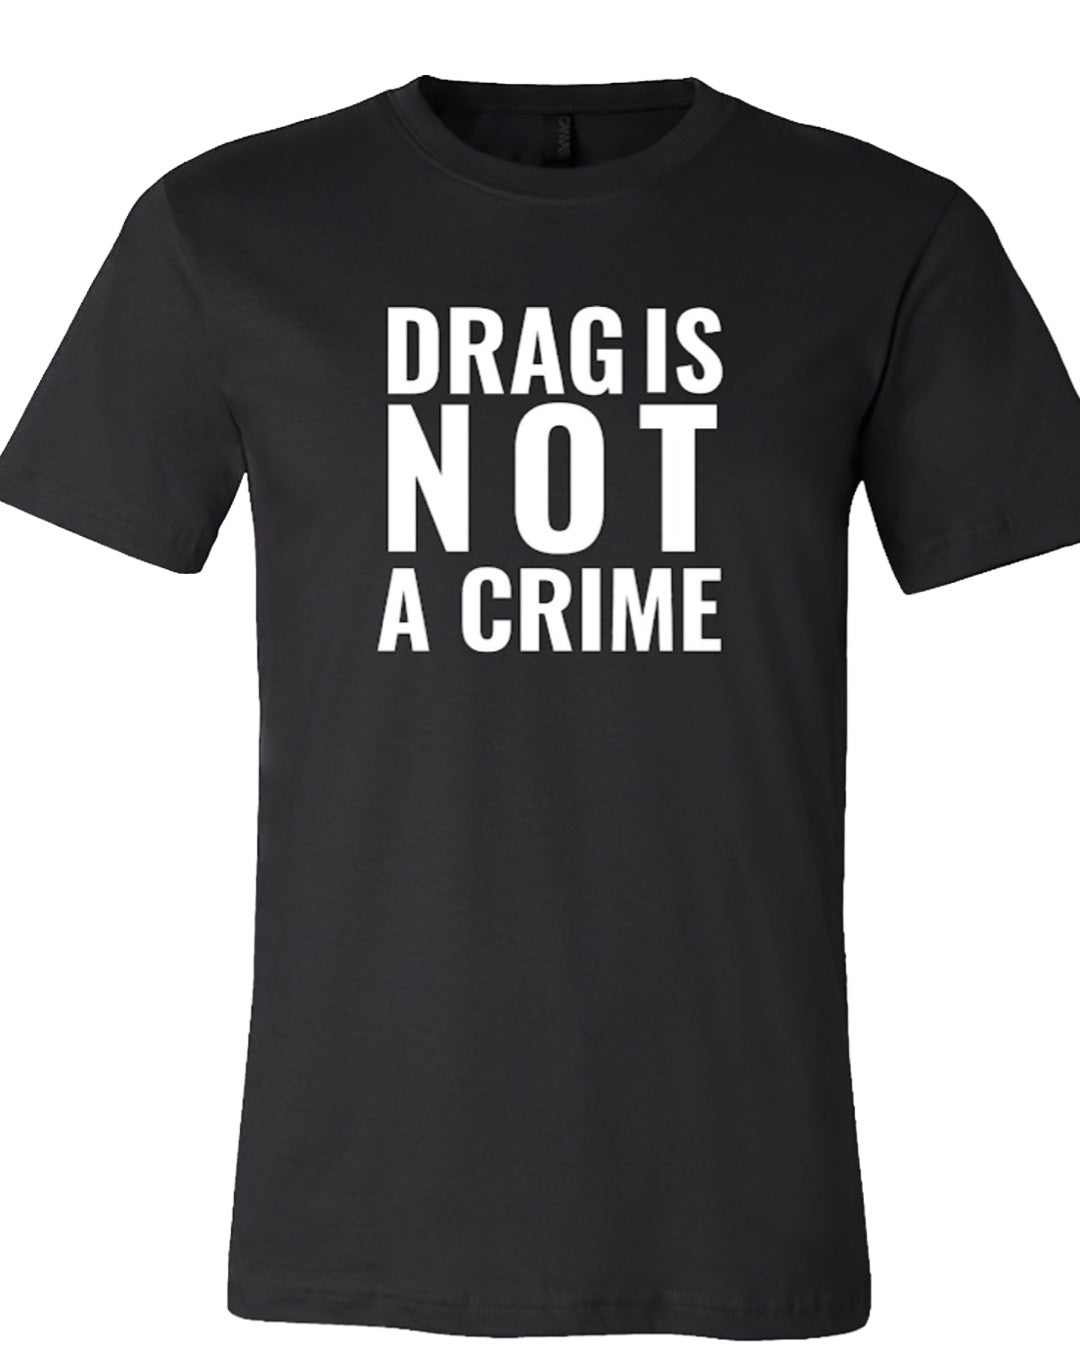 DRAG IS NOT A CRIME – Lonestar Queer TX